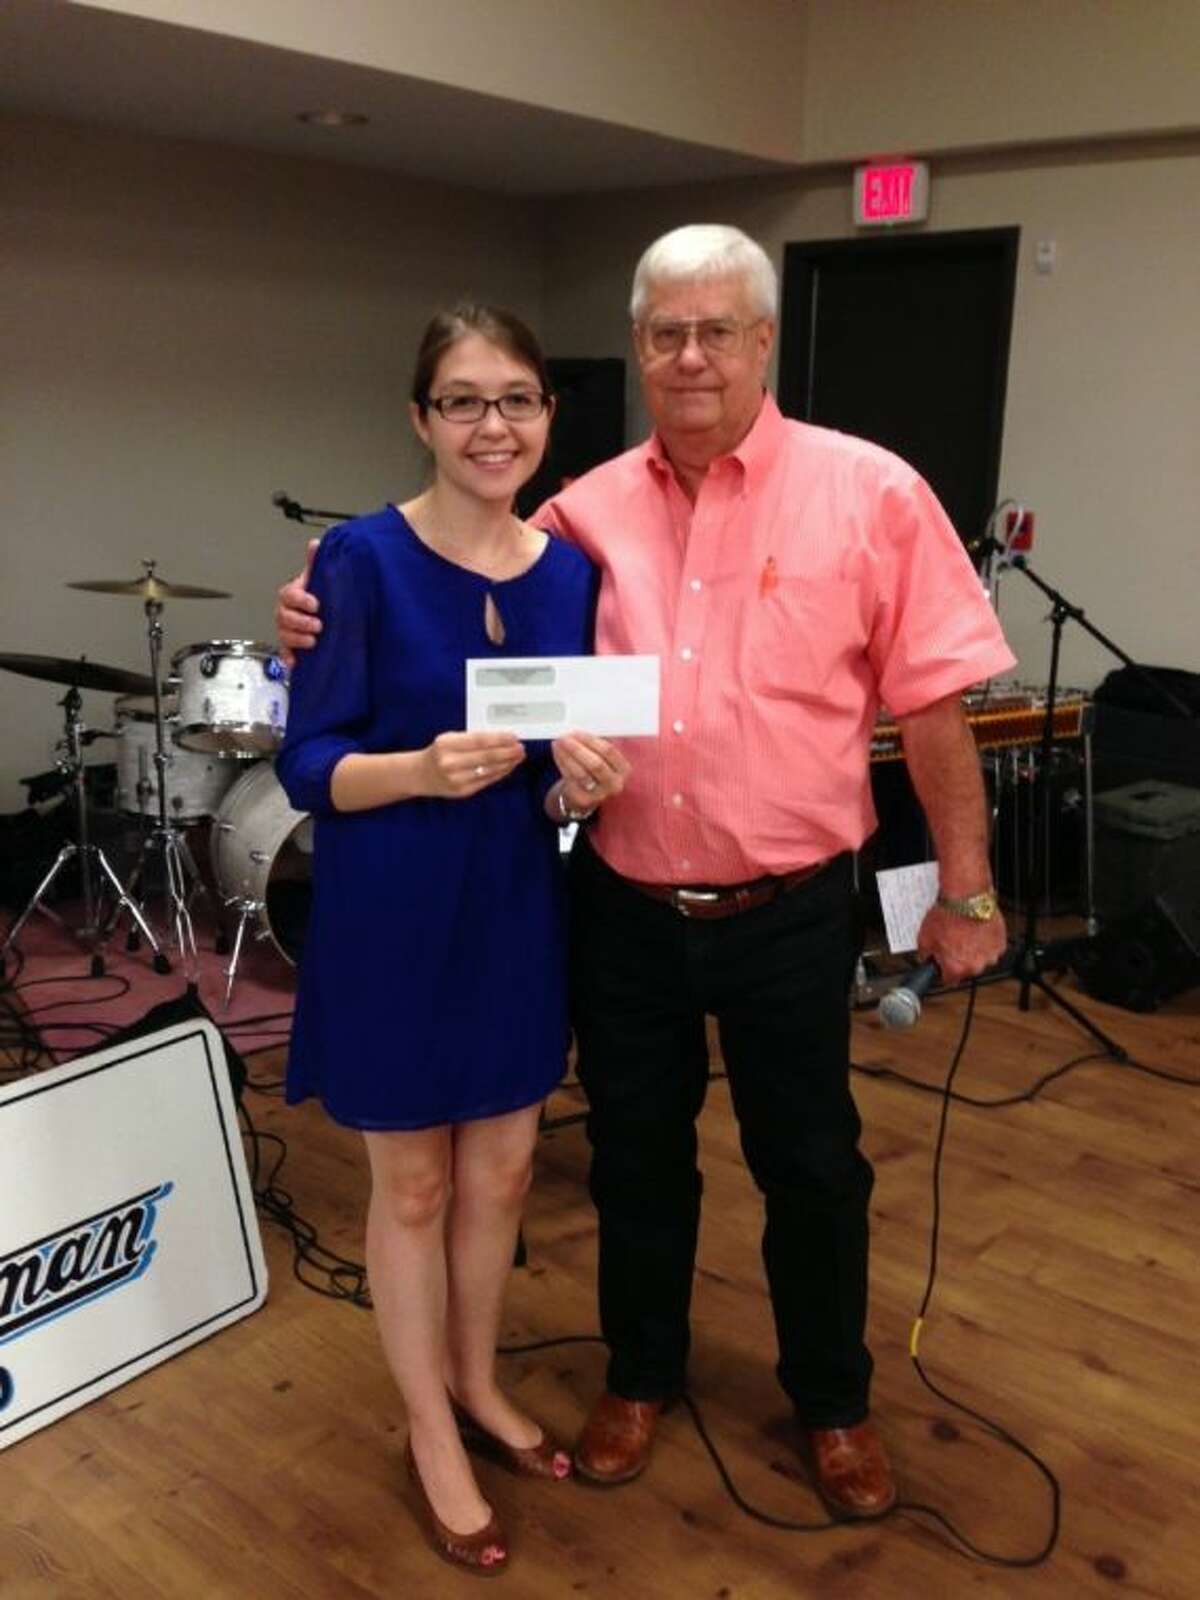 Anna Claire Croghan, executive director of The Friendship Center being presented with a check from Bill Robinson, president of the 60+ dance club